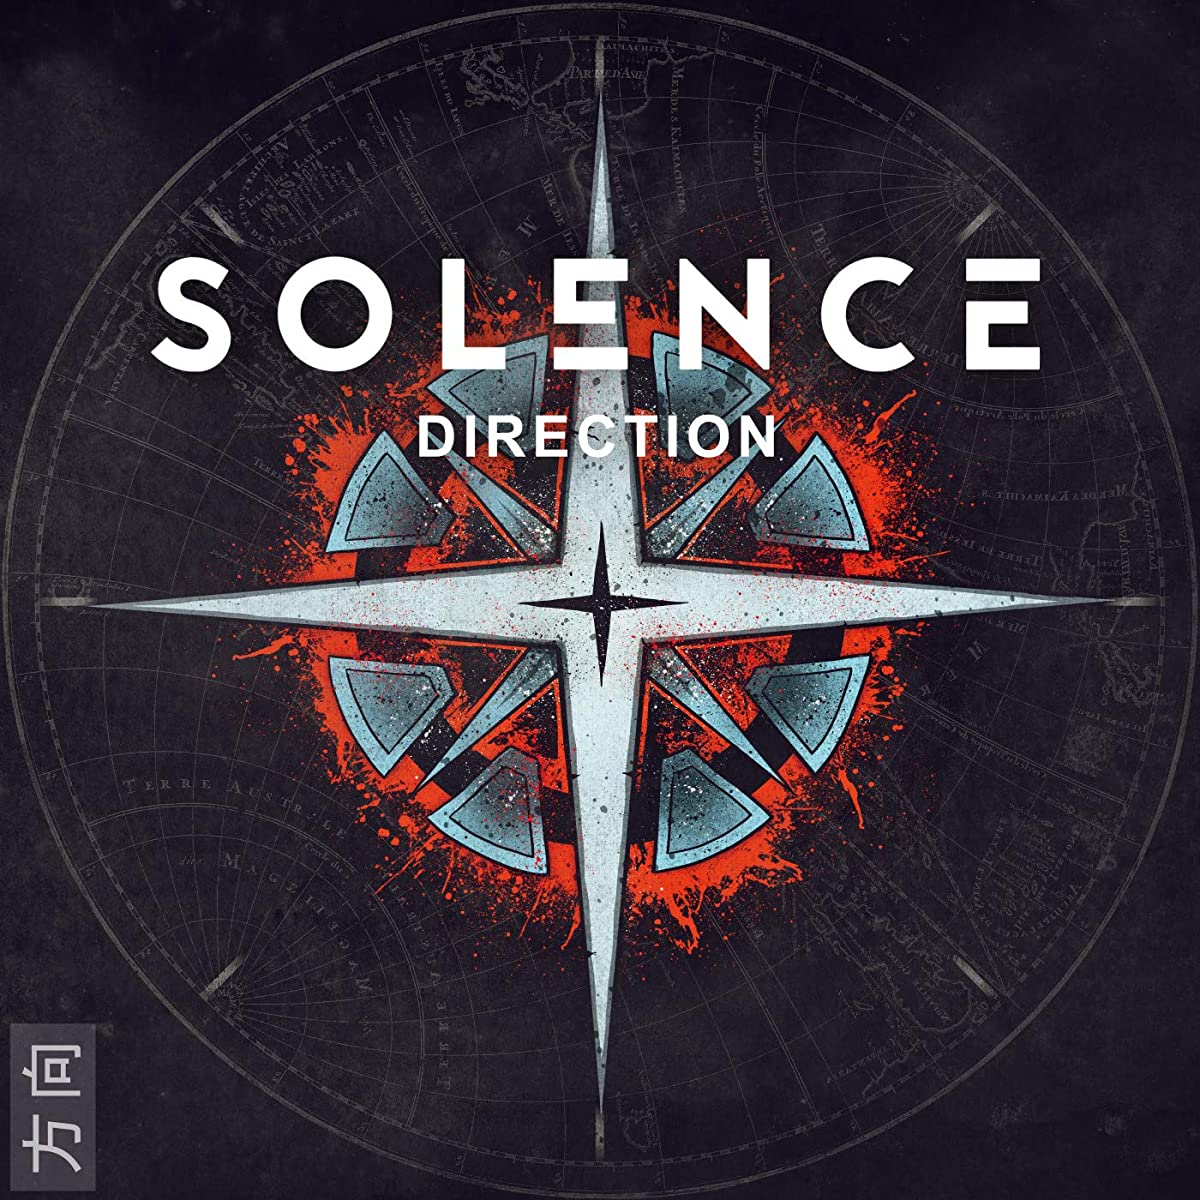 Solence Direction